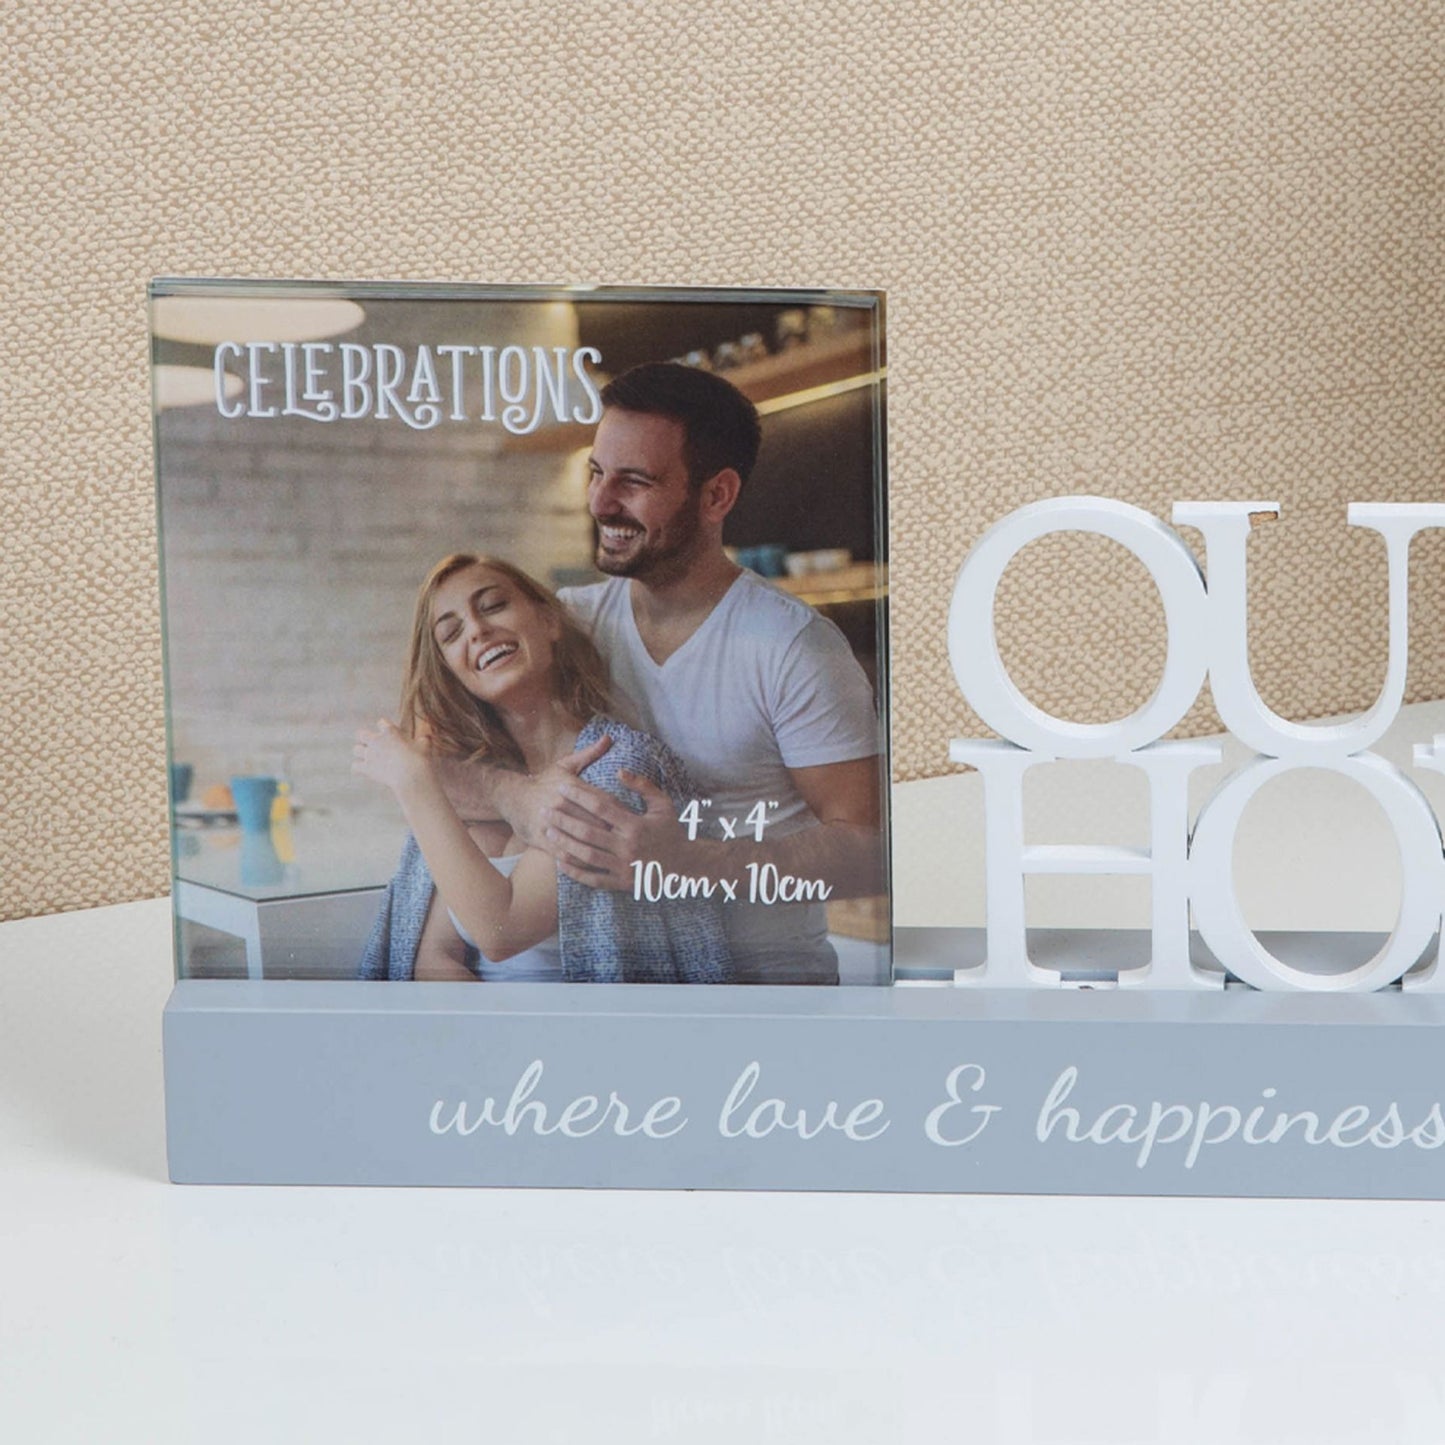 Celebrations Photo Frames | 4x4 Inch Photo Size | Our Home